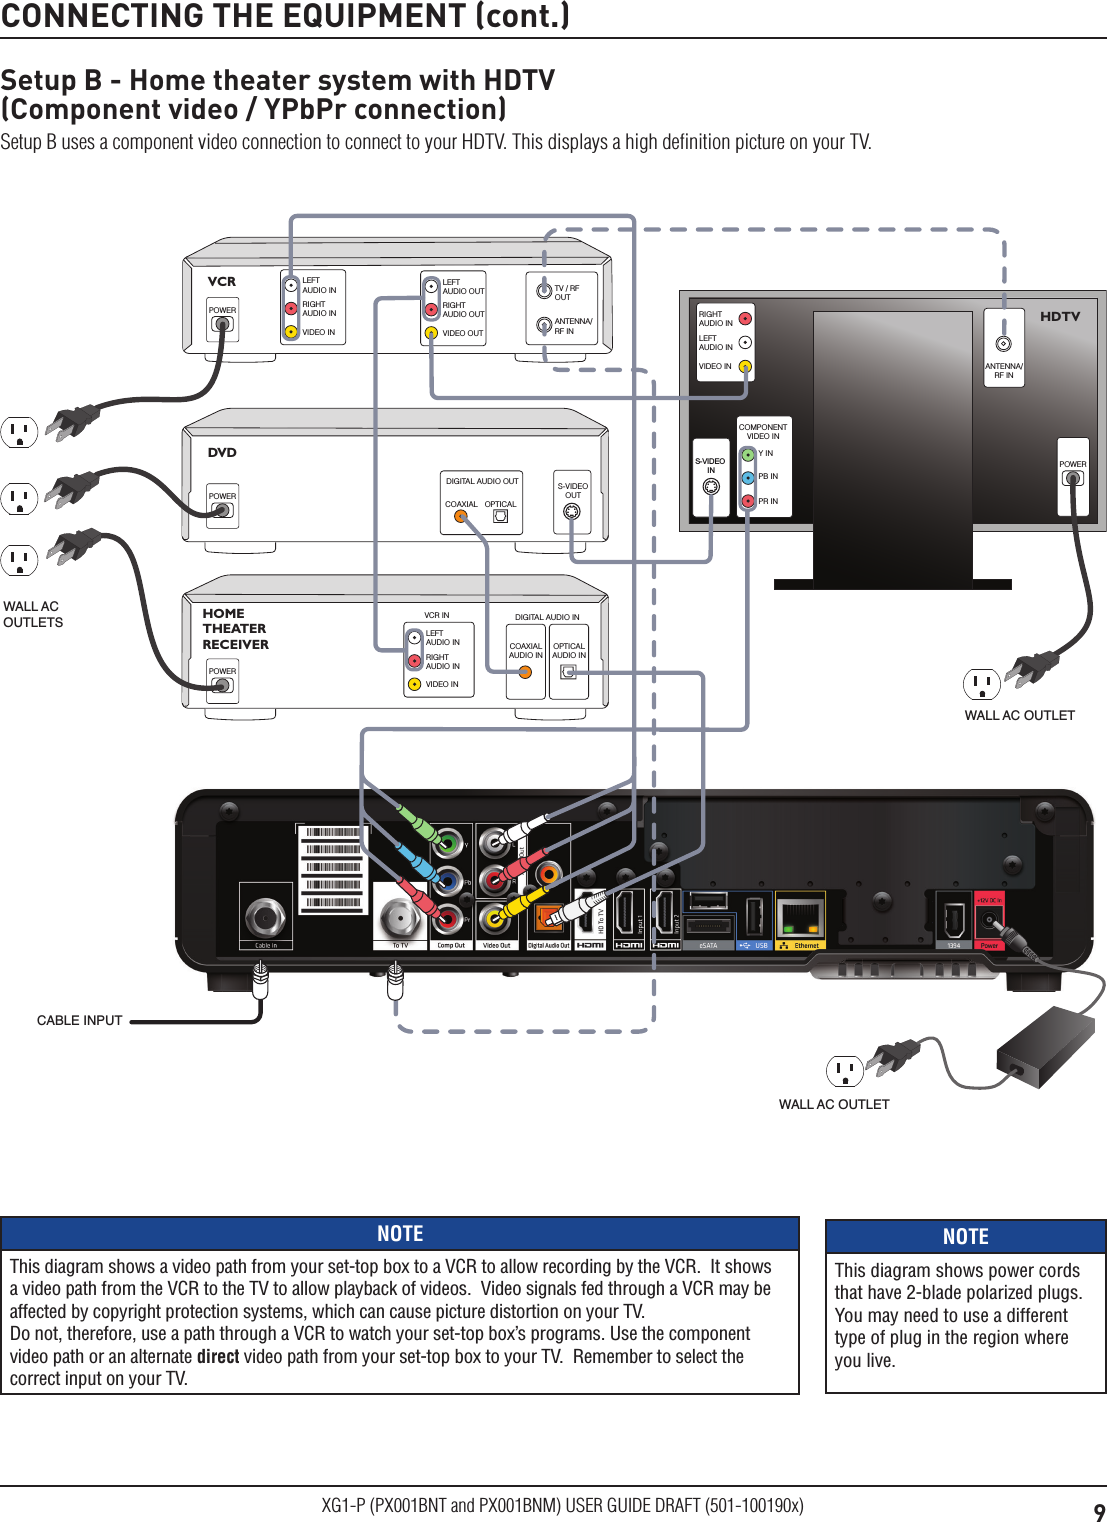 9XG1-P (PX001BNT and PX001BNM) USER GUIDE DRAFT (501-100190x)CONNECTING THE EQUIPMENT (cont.)Setup B - Home theater system with HDTV  (Component video / YPbPr connection)Setup B uses a component video connection to connect to your HDTV. This displays a high deﬁnition picture on your TV.VCRDVDDIGITAL AUDIO OUTOPTICALCOAXIALANTENNA/RF INTV / RF OUTLEFTAUDIO OUTRIGHTAUDIO OUTVIDEO OUTLEFTAUDIO INRIGHTAUDIO INVIDEO INOPTICALAUDIO INCOAXIALAUDIO INDIGITAL AUDIO INHOME THEATER RECEIVERLEFTAUDIO INVCR INRIGHTAUDIO INVIDEO INANTENNA/RF INPB INPR INY INCOMPONENTVIDEO INLEFTAUDIO INRIGHTAUDIO INVIDEO INHDTVPOWERPOWERPOWERPOWERS-VIDEOINS-VIDEOOUTCABLE INPUTWALL ACOUTLETSWALL AC OUTLETWALL AC OUTLETNOTEThis diagram shows a video path from your set-top box to a VCR to allow recording by the VCR.  It shows a video path from the VCR to the TV to allow playback of videos.  Video signals fed through a VCR may be affected by copyright protection systems, which can cause picture distortion on your TV.   Do not, therefore, use a path through a VCR to watch your set-top box’s programs. Use the component video path or an alternate direct video path from your set-top box to your TV.  Remember to select the correct input on your TV.NOTEThis diagram shows power cords that have 2-blade polarized plugs. You may need to use a different type of plug in the region where you live.